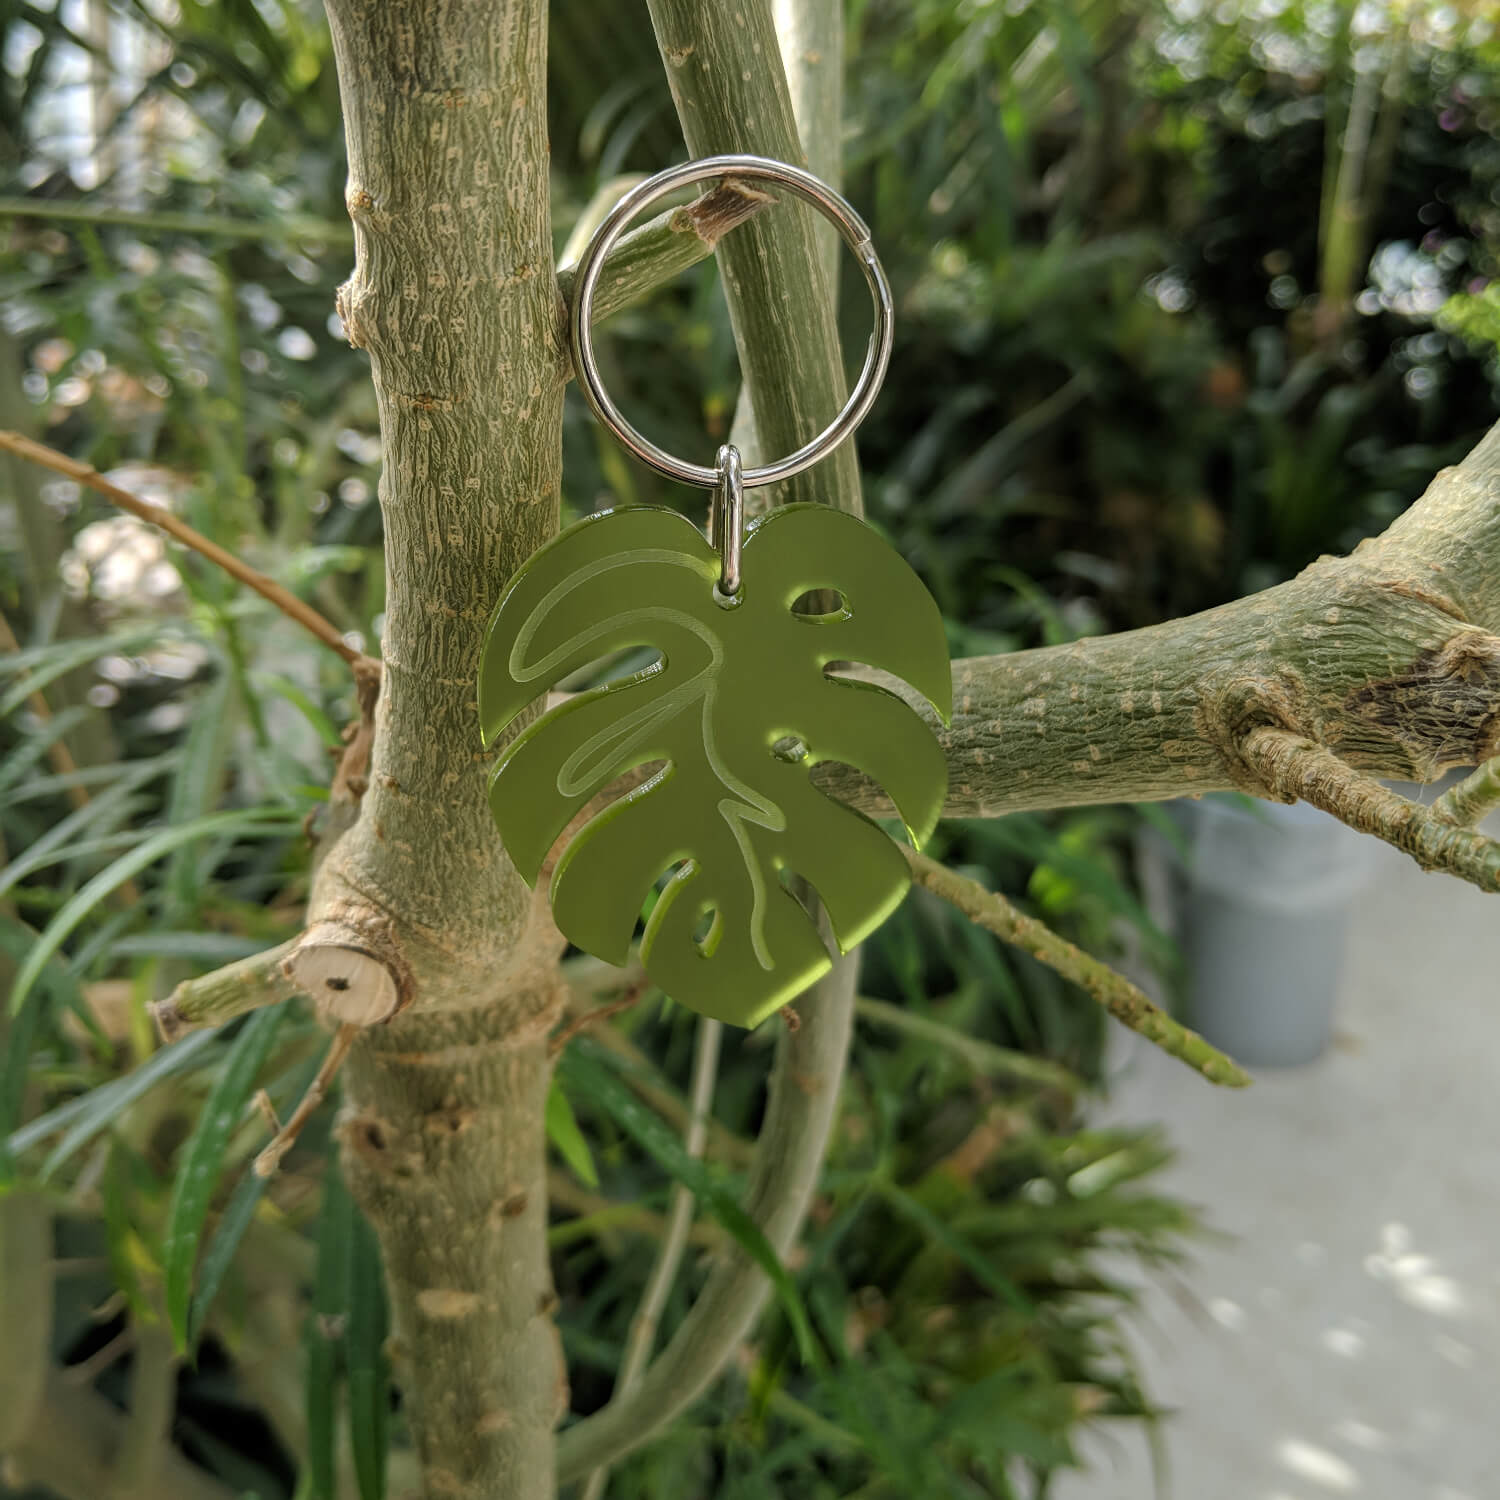 Swiss Cheese Plant Keyring - The Moonlit Press